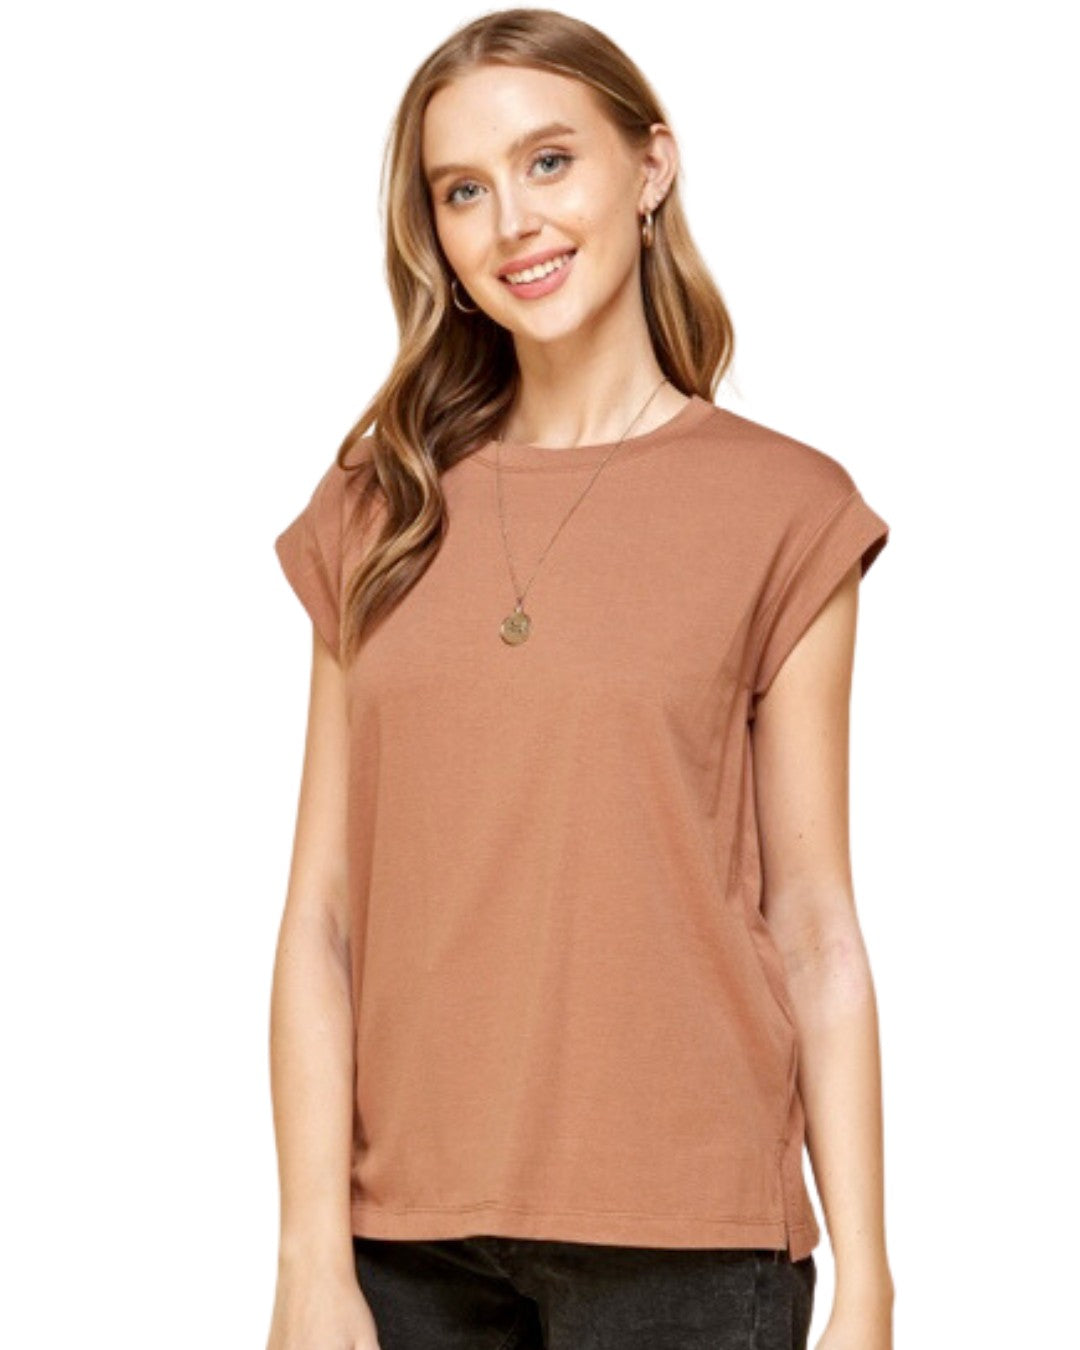 Latte Basic Top, Made in USA